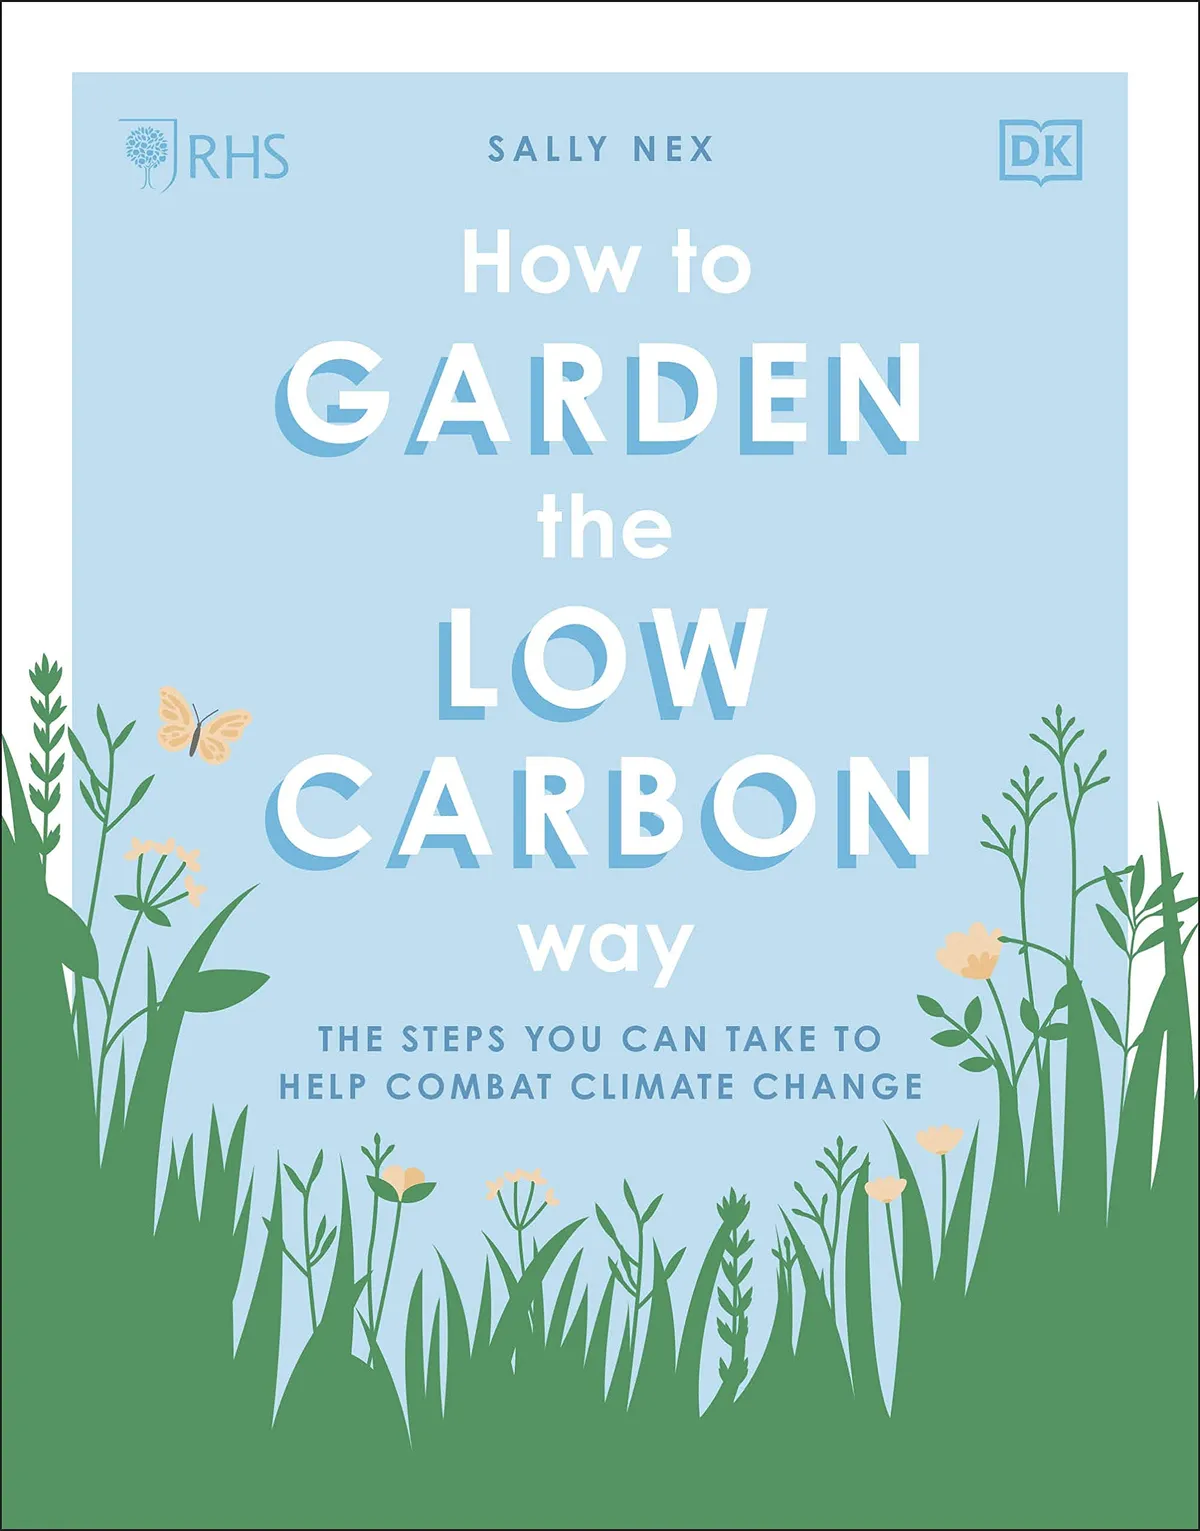 How to garden the low carbon way book cover